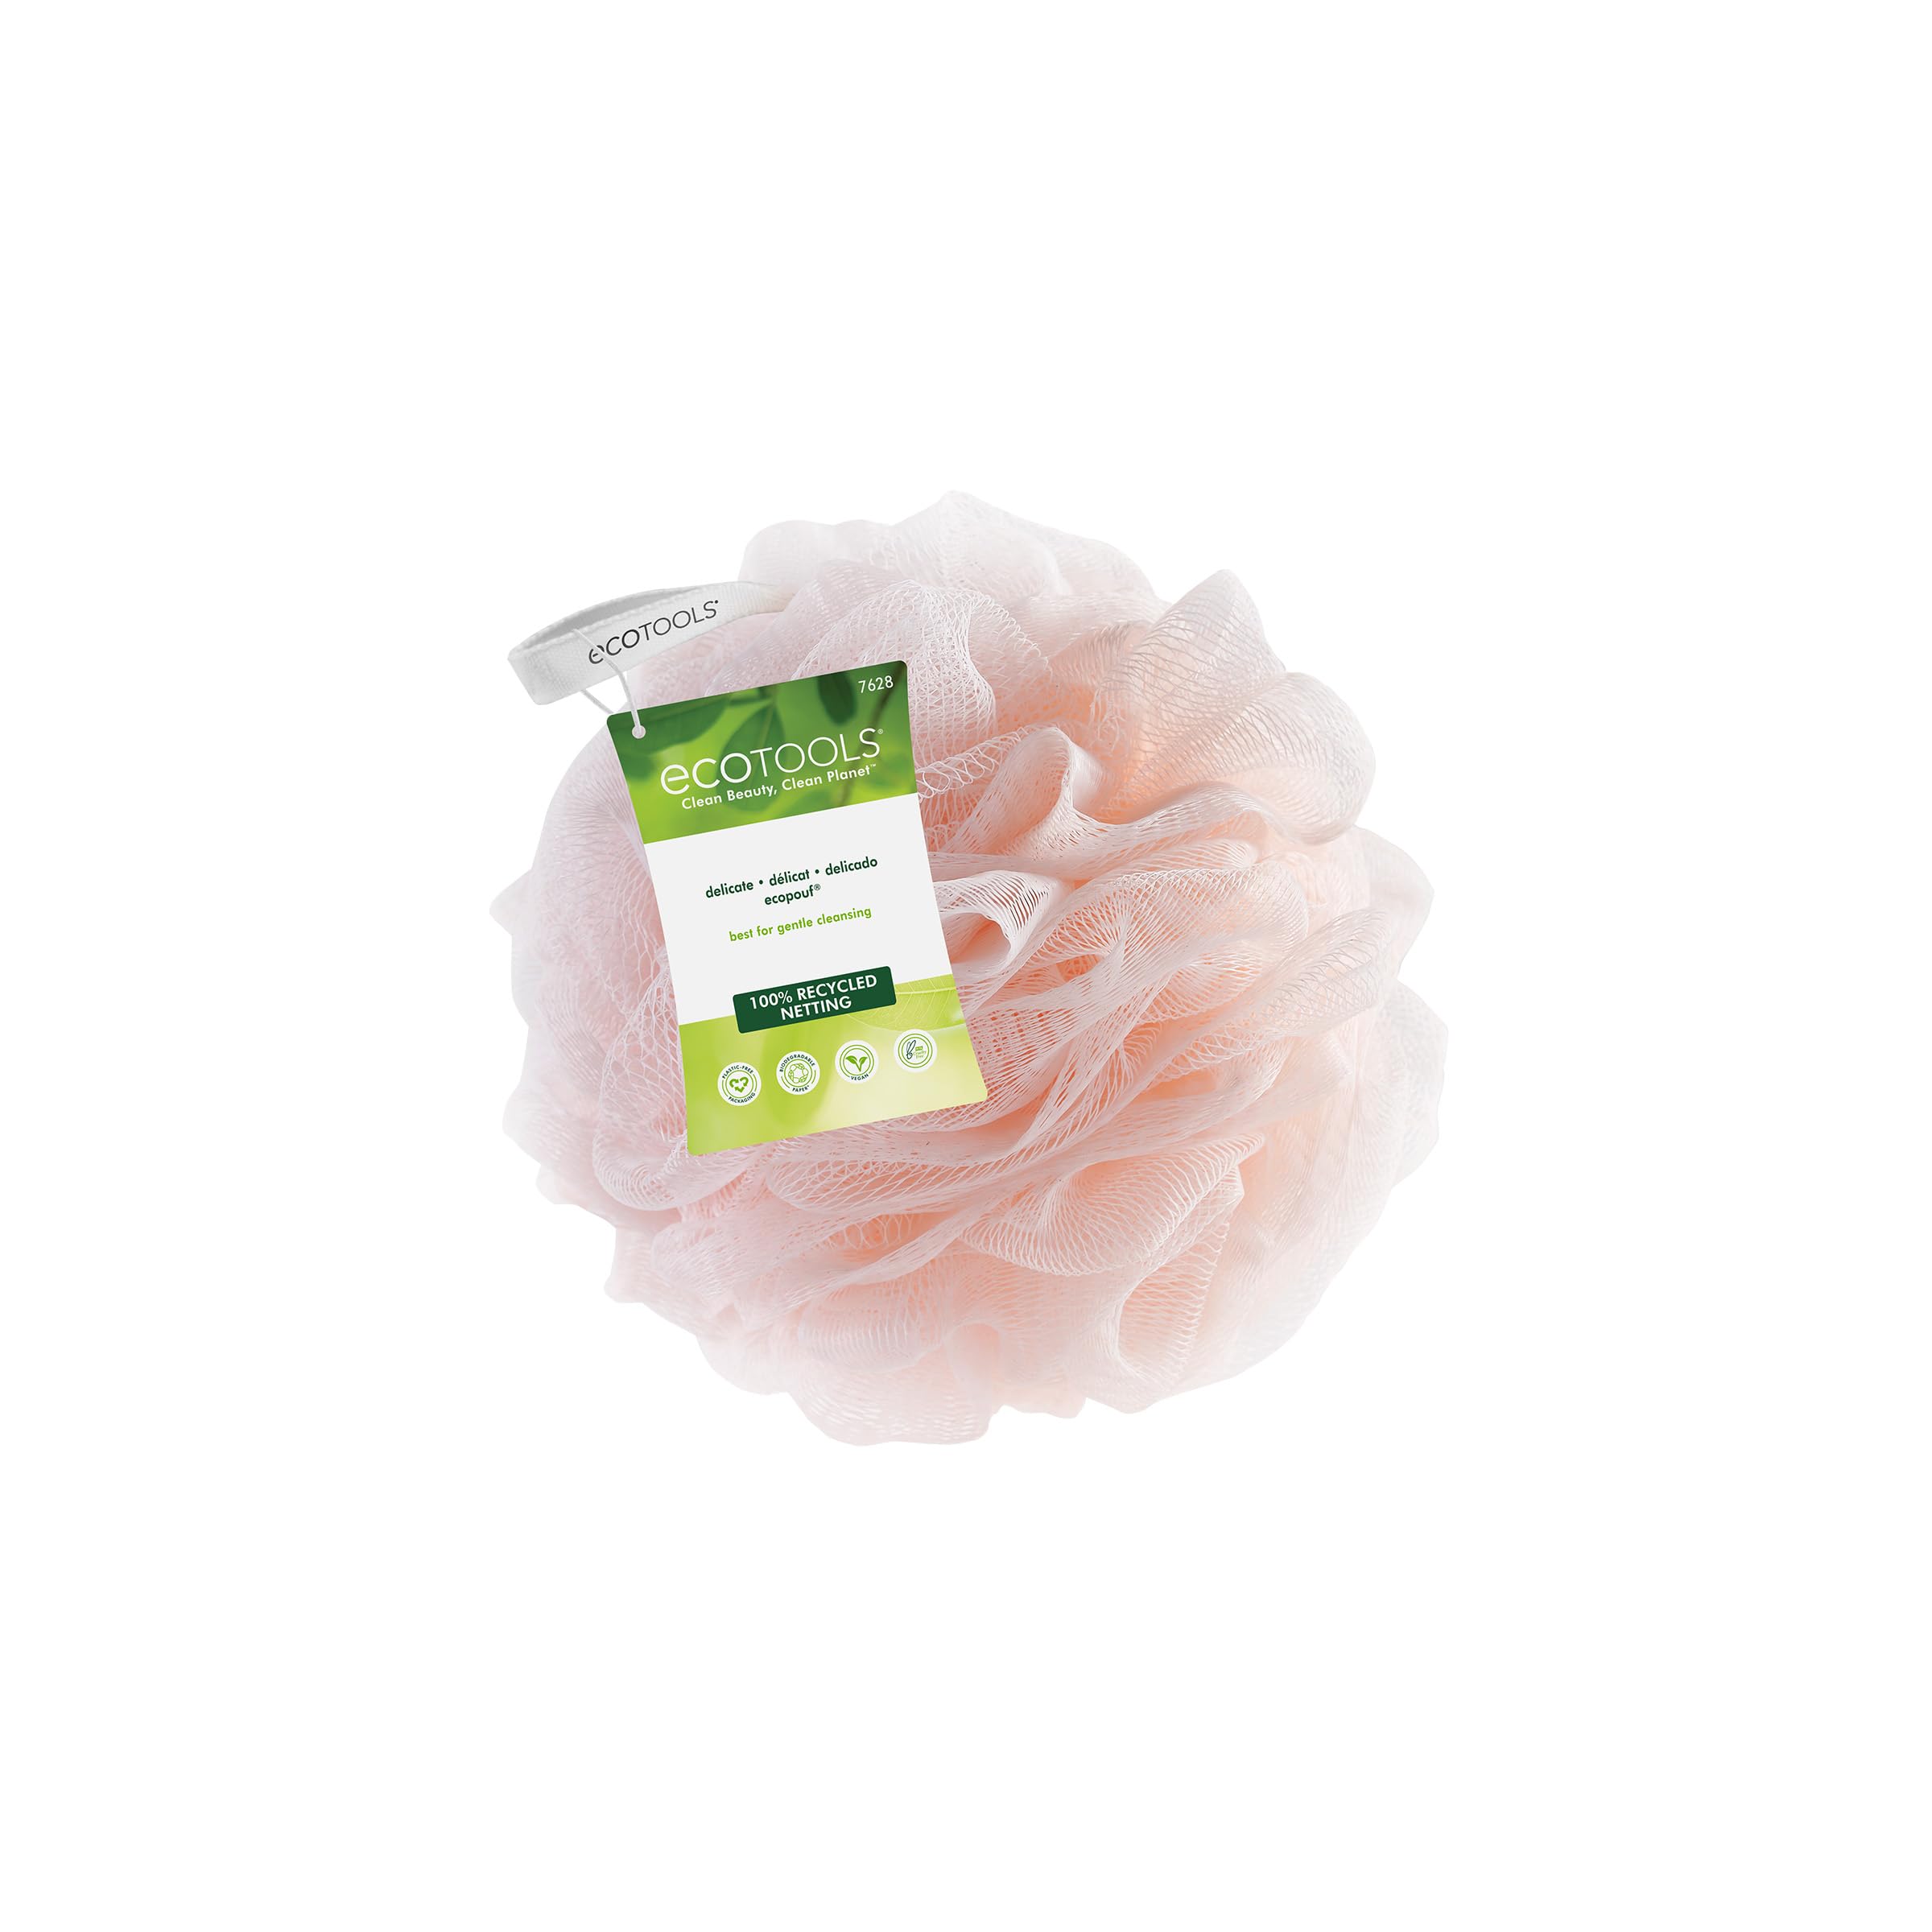 EcoTools Delicate EcoPouf Bath Loofah, Recycled Netting, Gentle Bath Sponge, Exfoliates & Cleanses Skin, for Shower & Bath Routine, Eco-Friendly, Vegan, & Cruelty-Free, Pink, 1 Count